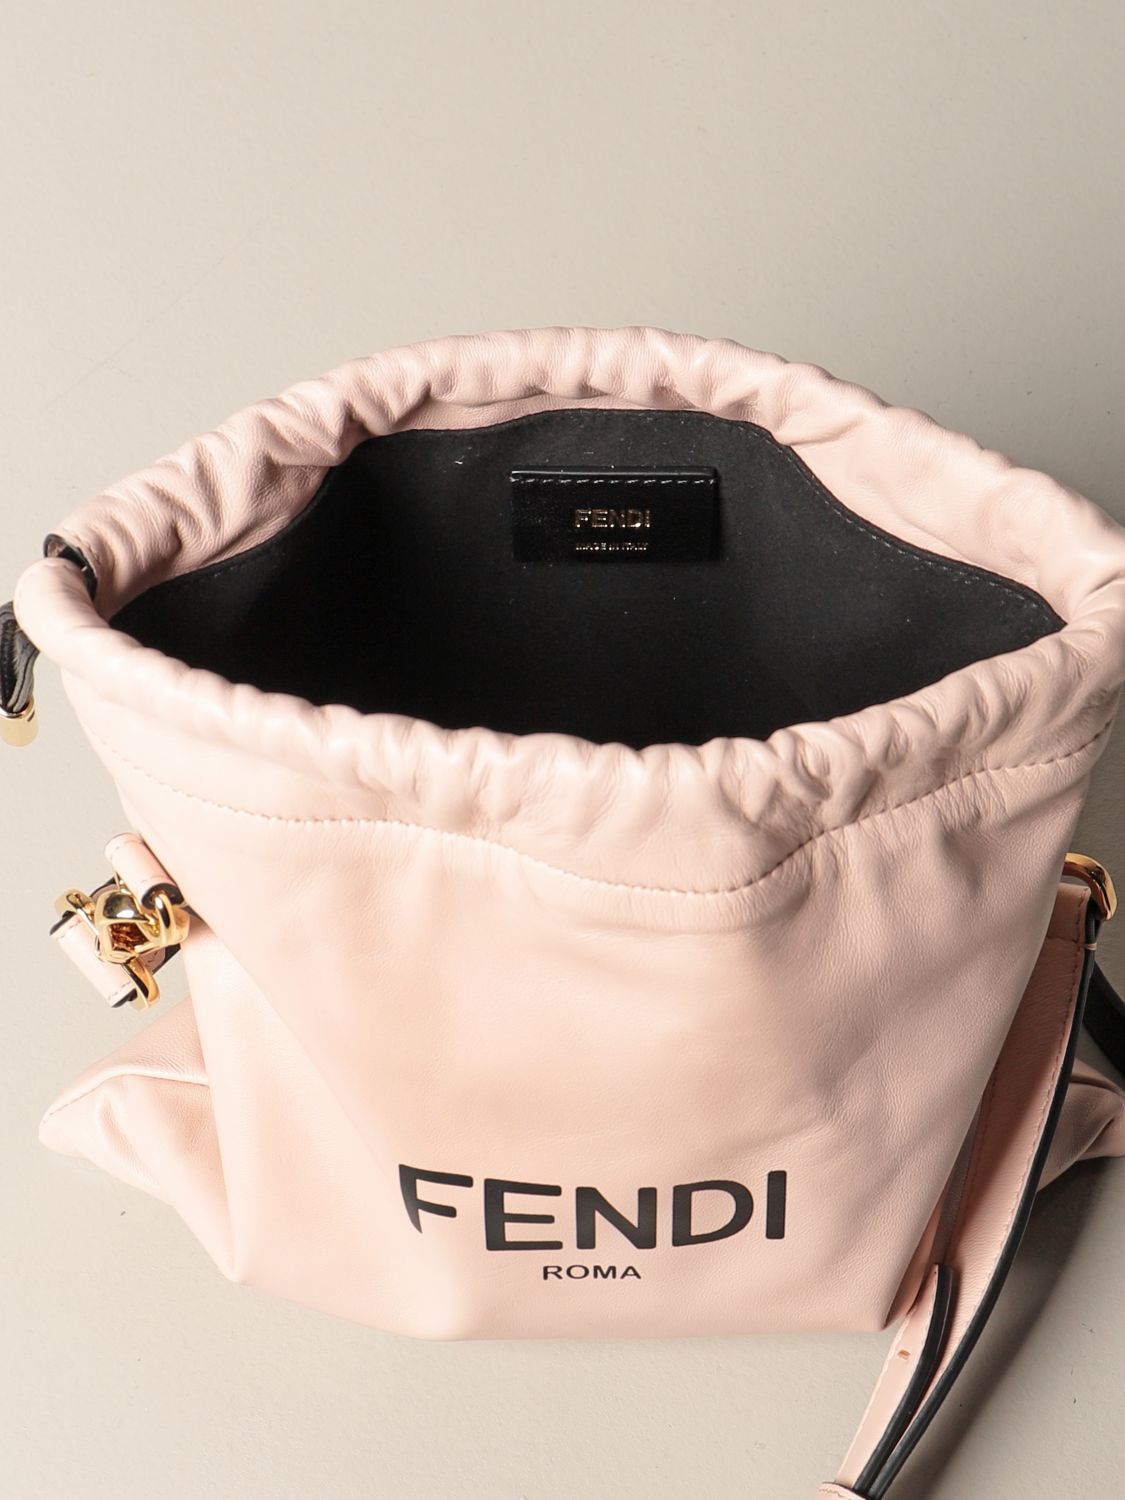 FENDI: pouch bag in nappa leather with logo - Pink  Fendi crossbody bags  8BT337 ADM9 online at